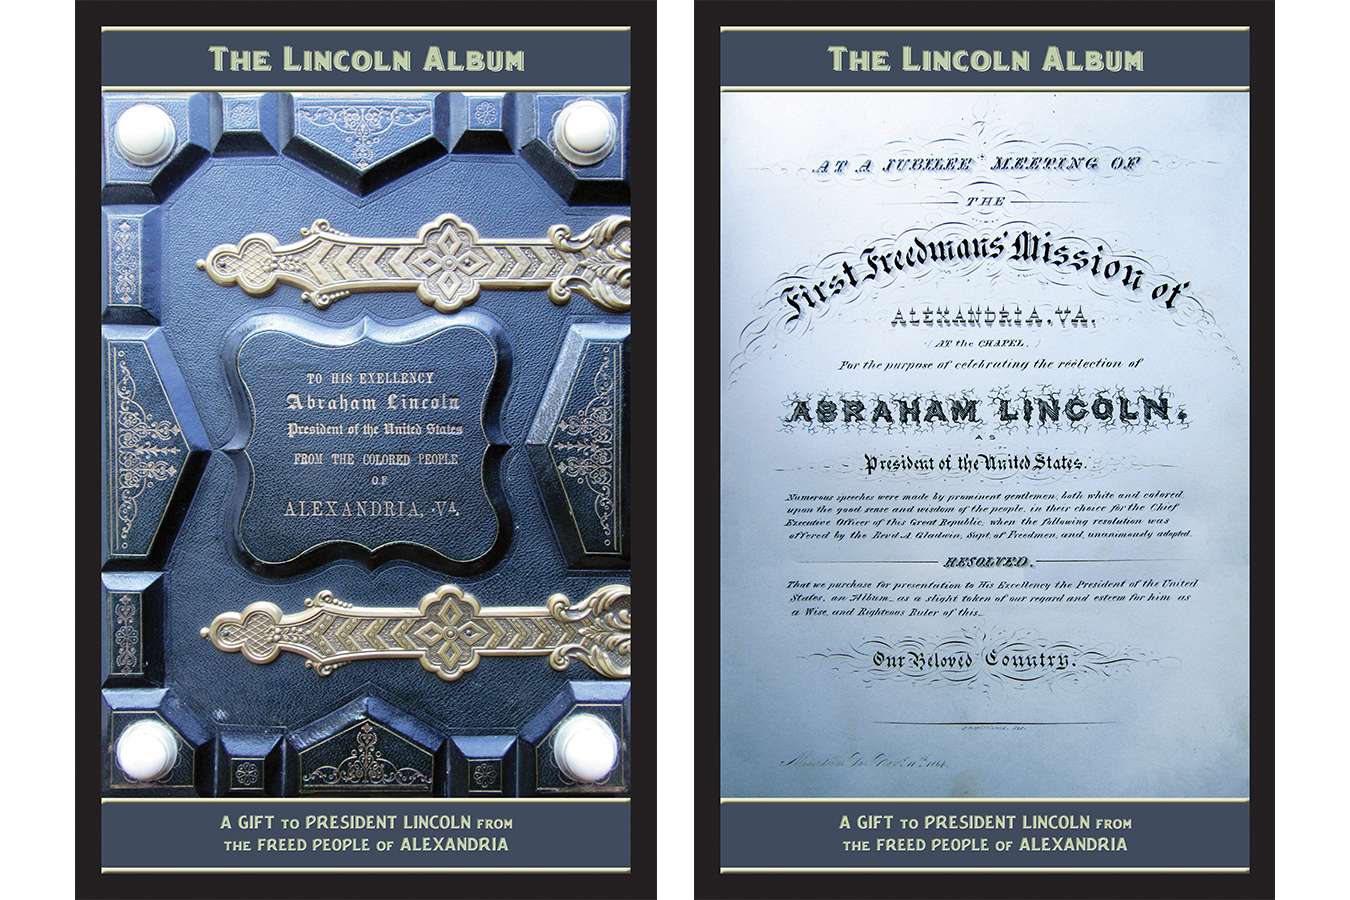 1 Linc Alb : Cover and Title Page of the Lincoln Album